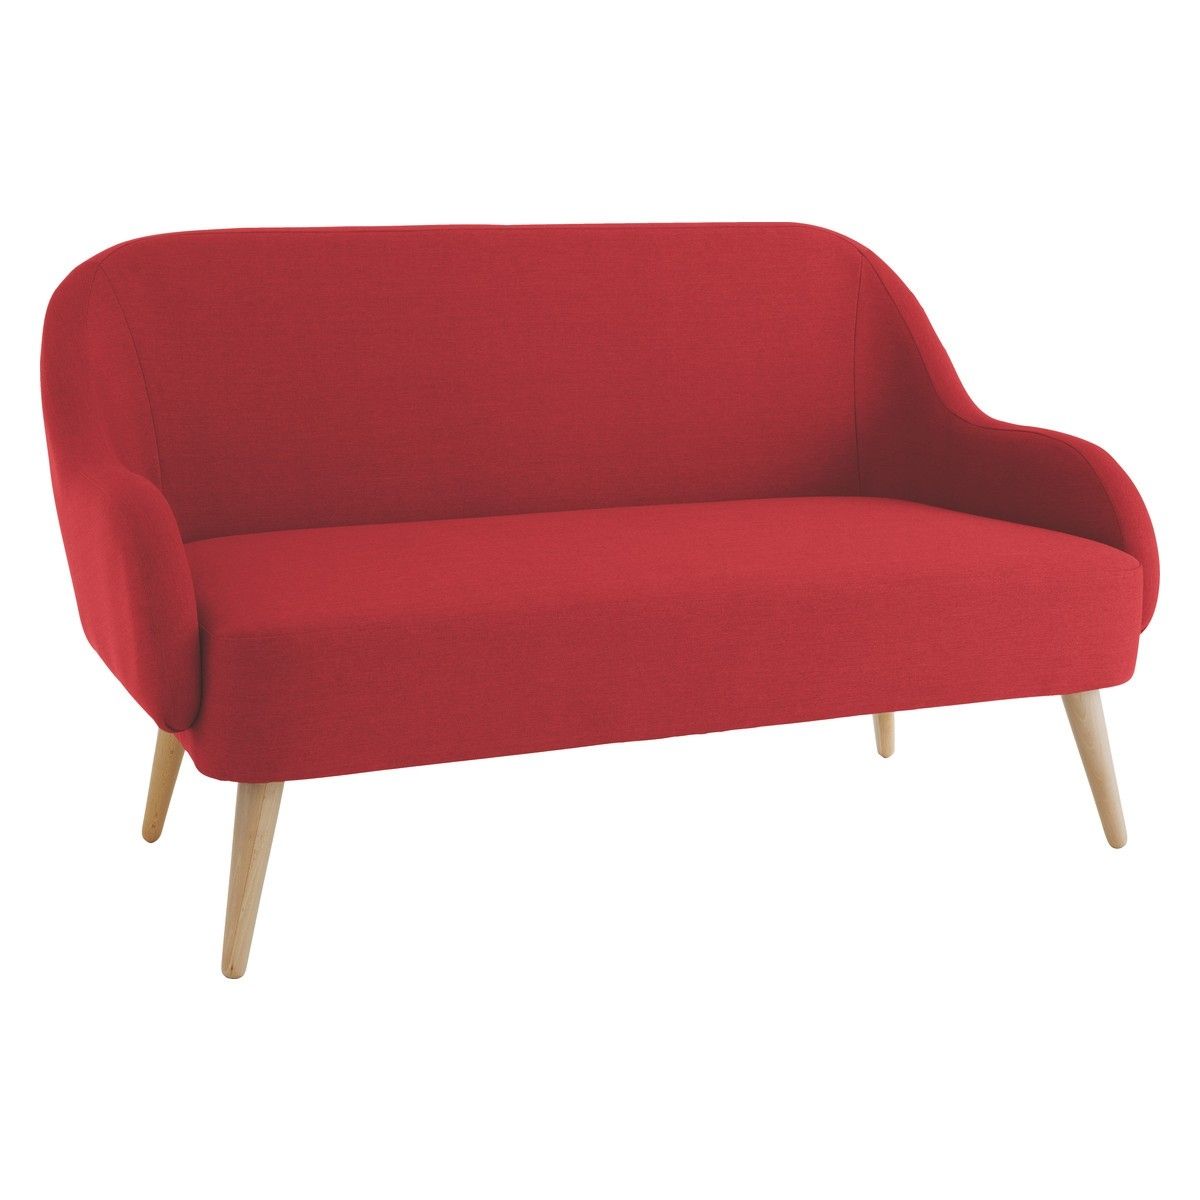 Momo Red Fabric 2 Seater Sofa Buy Now At Habitat Uk Regarding Two Seater Chairs (View 8 of 15)